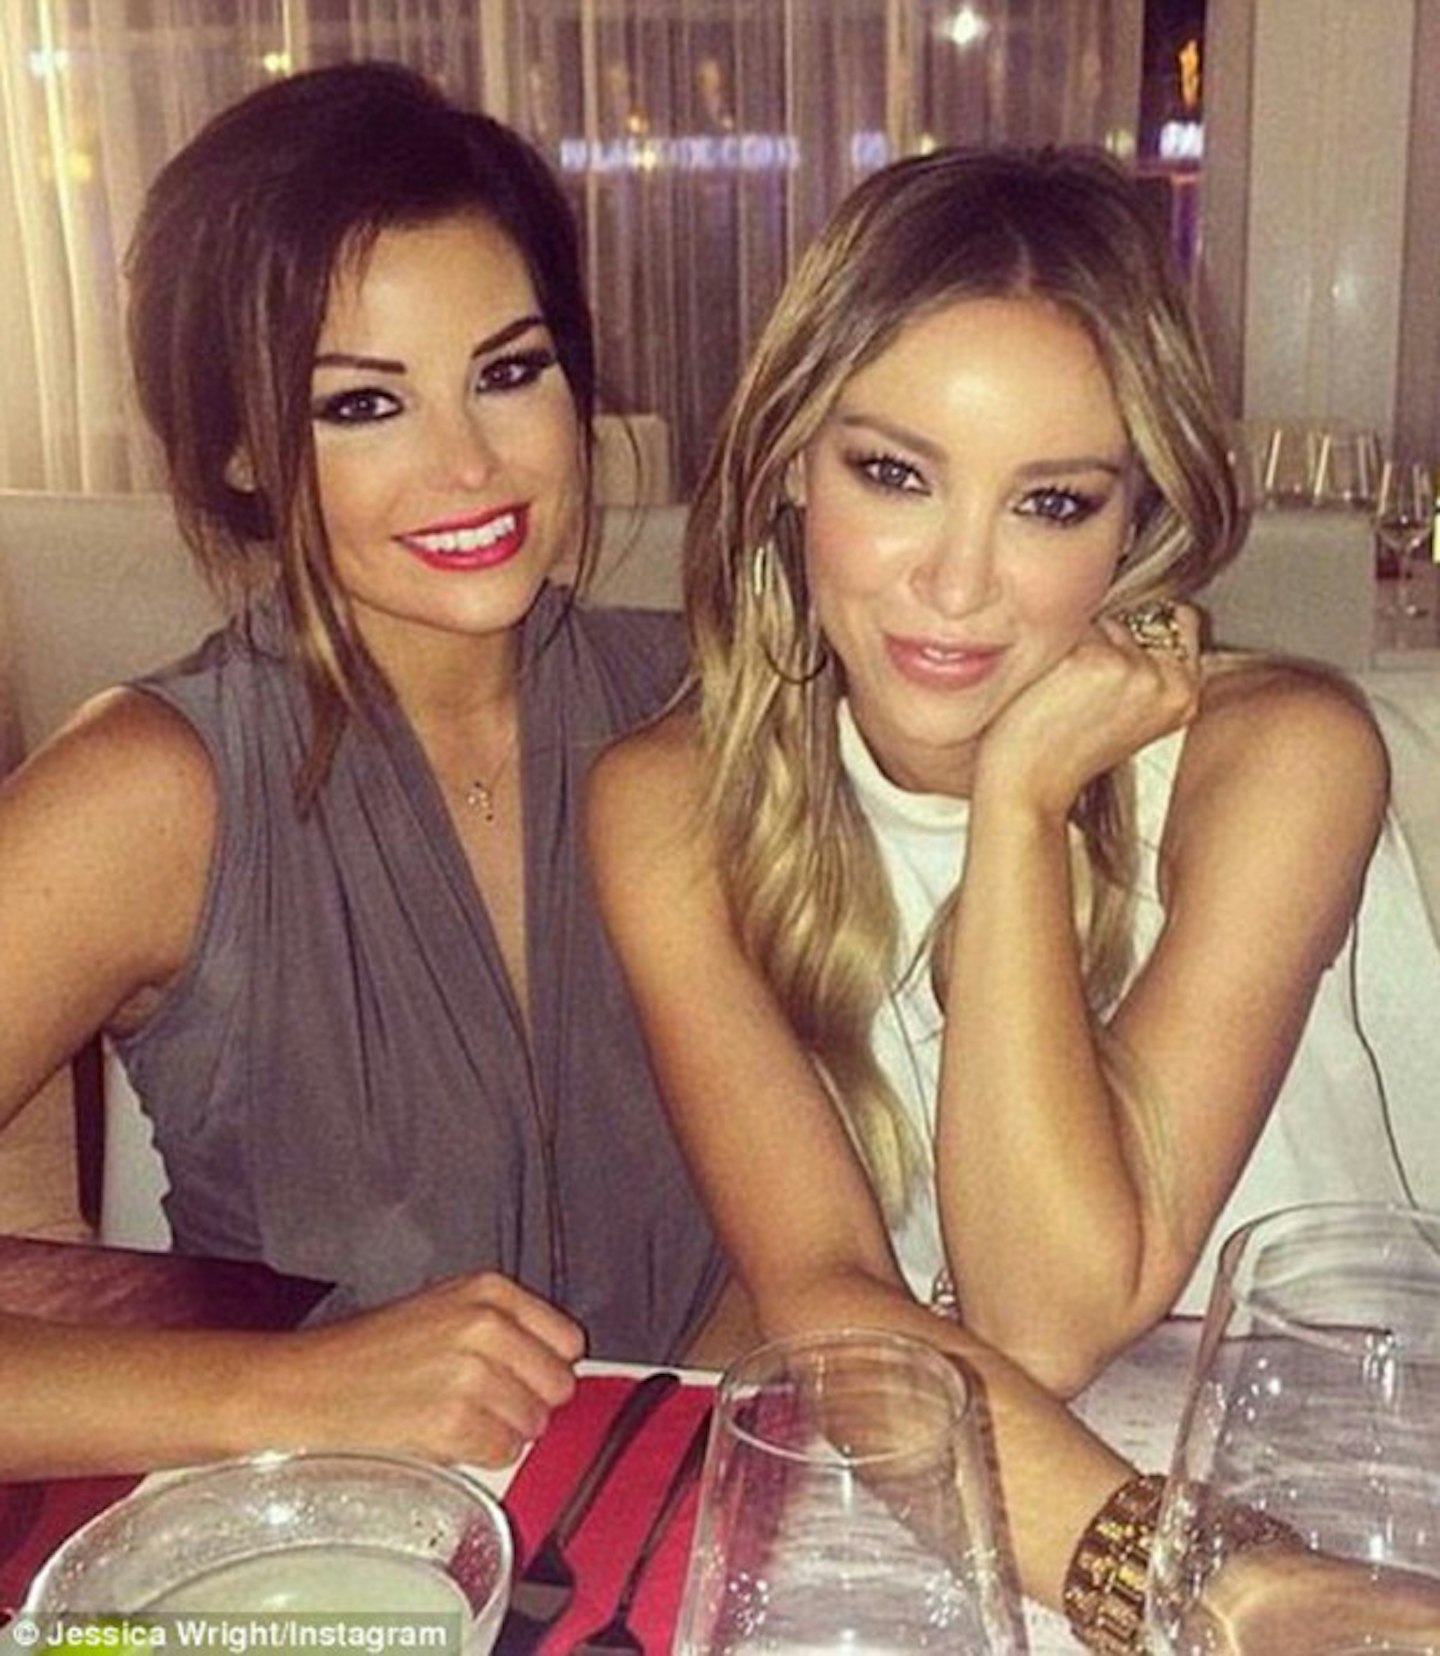 Jess Wright and Lauren Pope